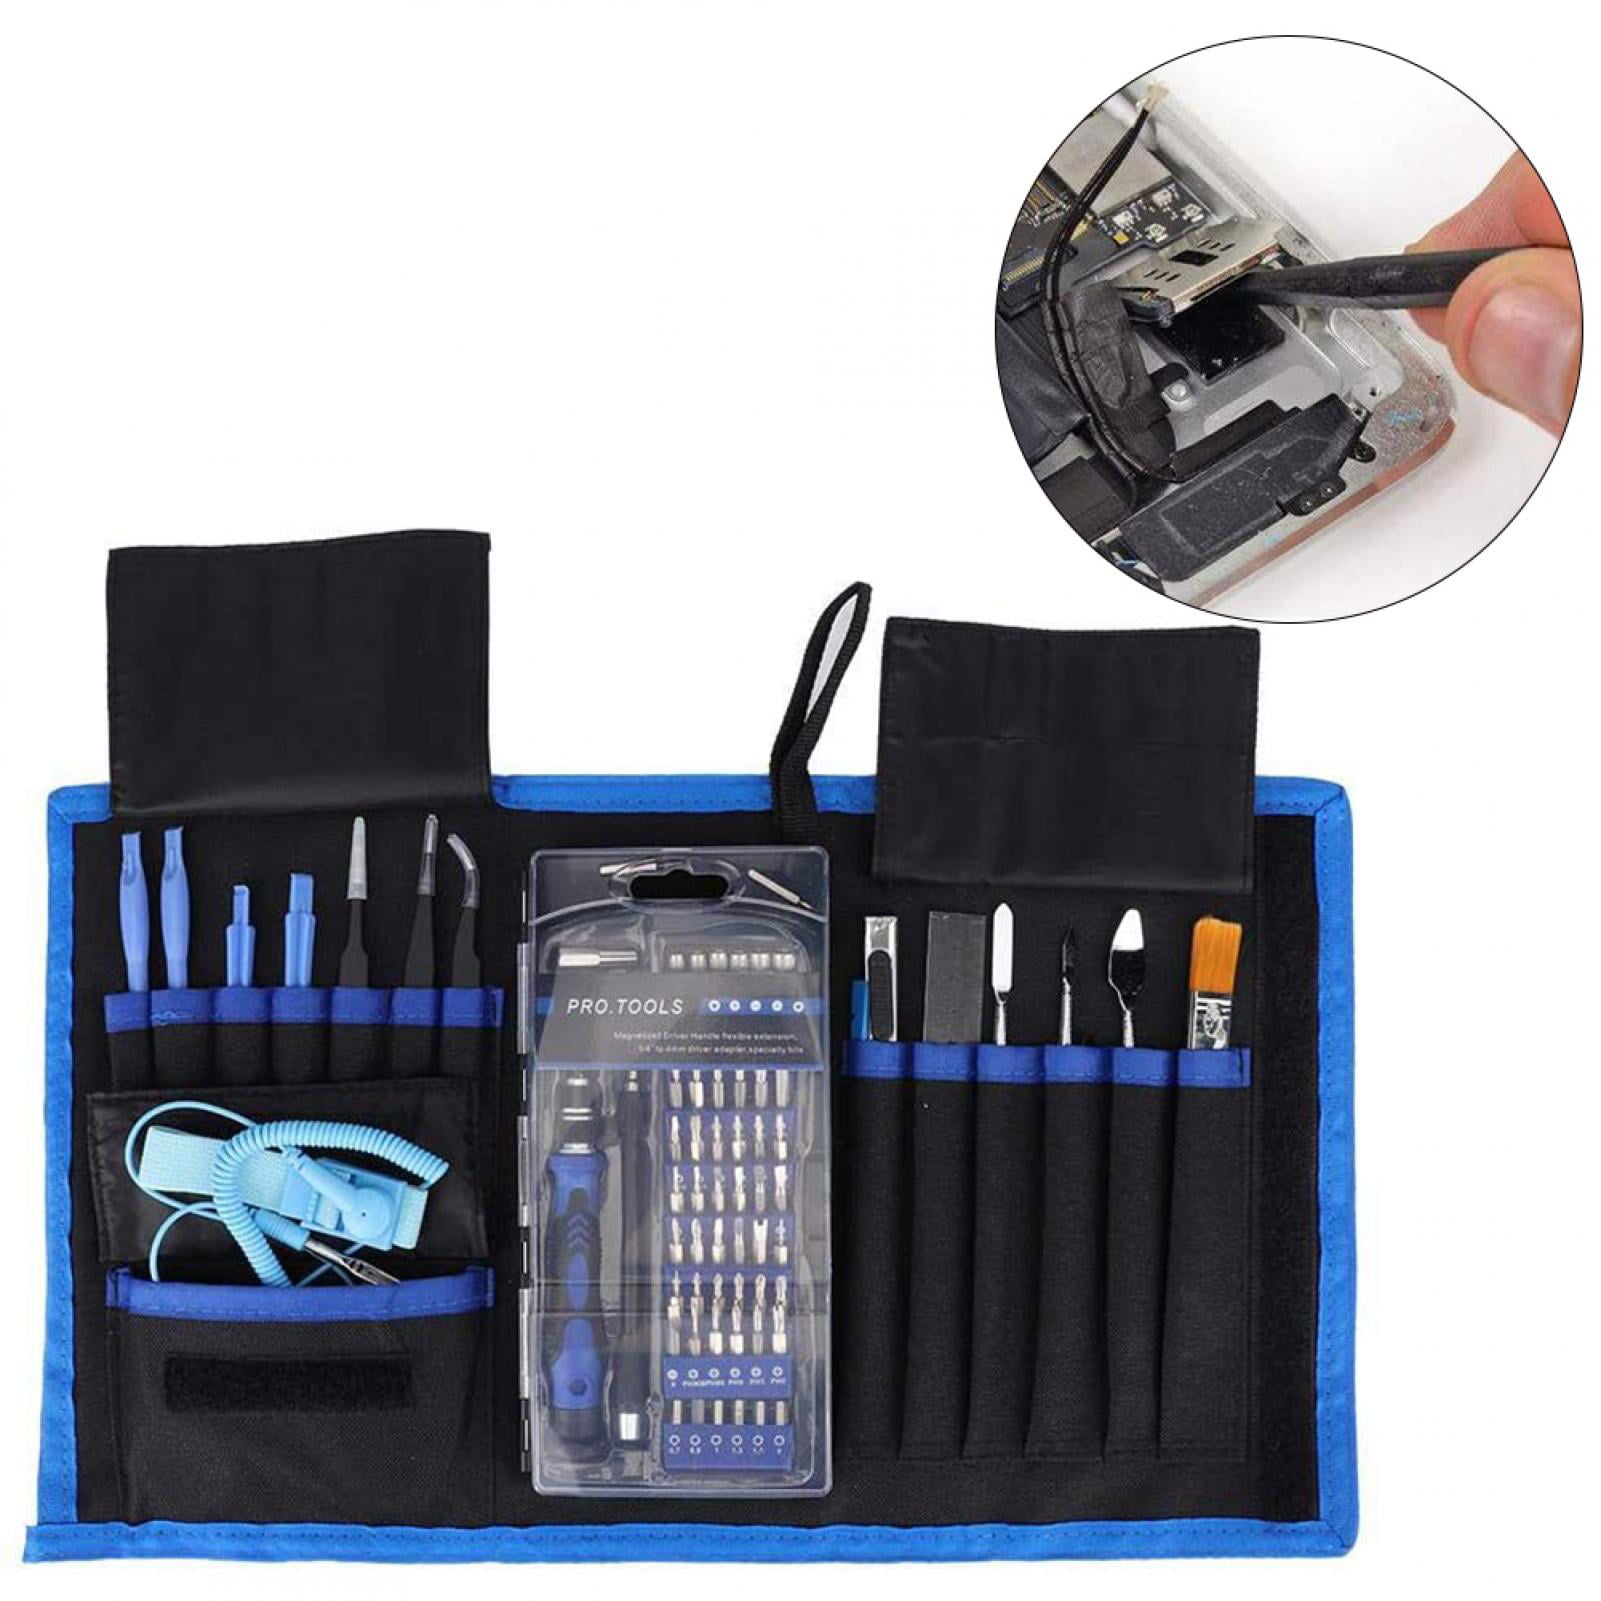 PC Professional Electronic Screwdriver Set Suitable for Laptop iMac Precision Computer Repair Tool Kit MacBook Cell Phone with a Small Torx Screwdriver iPhone and Other Electronics Maintenance